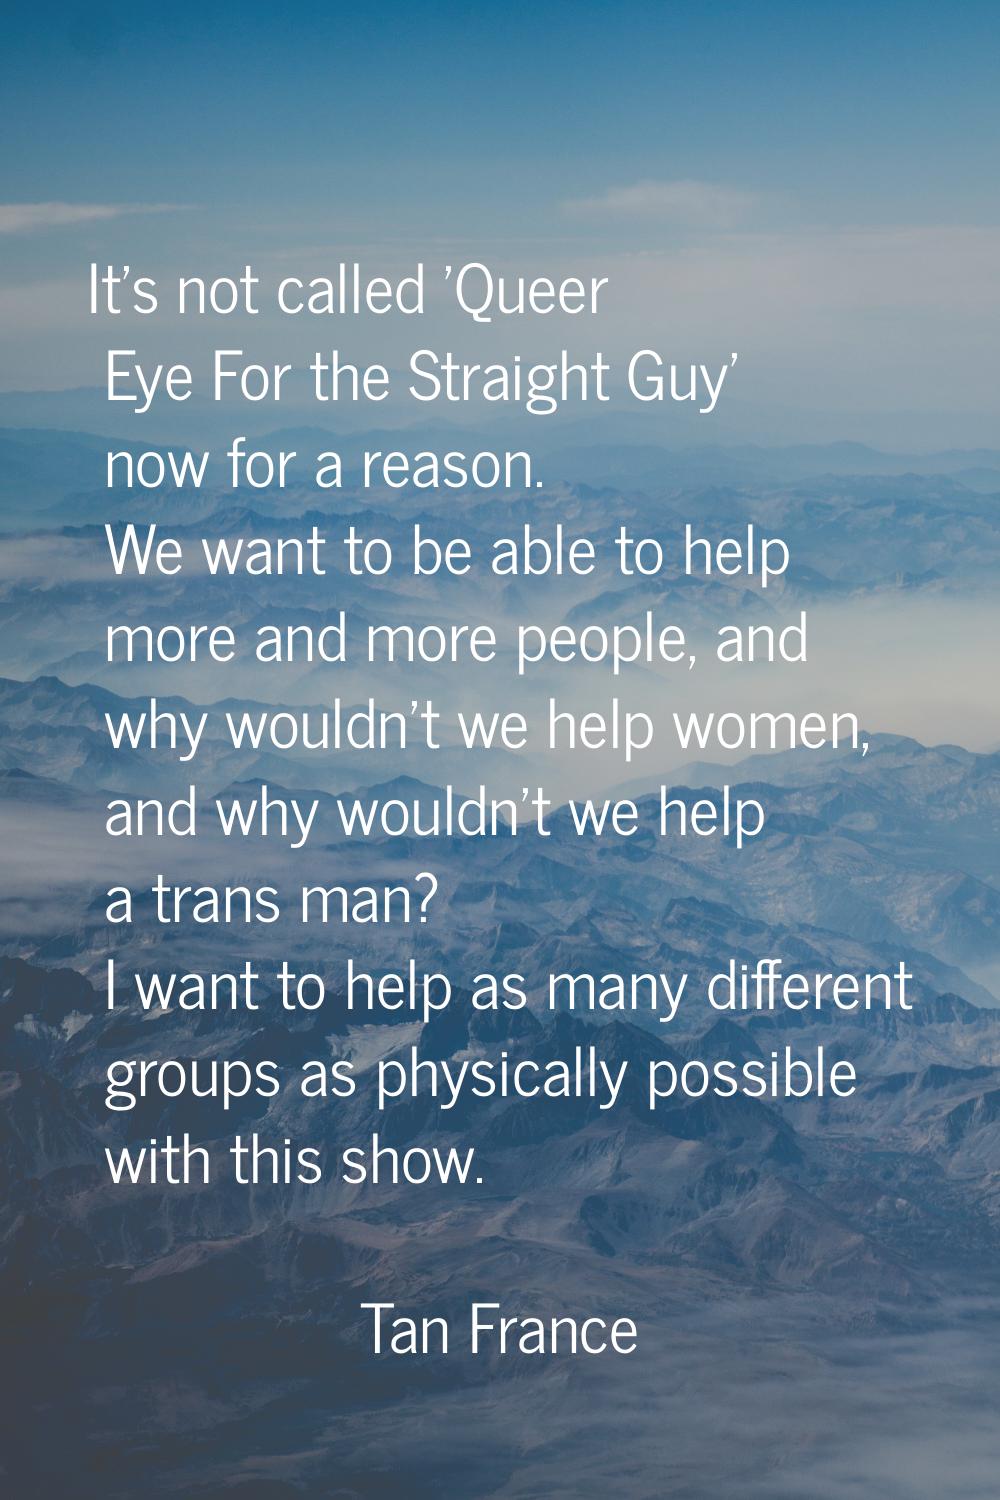 It's not called 'Queer Eye For the Straight Guy' now for a reason. We want to be able to help more 